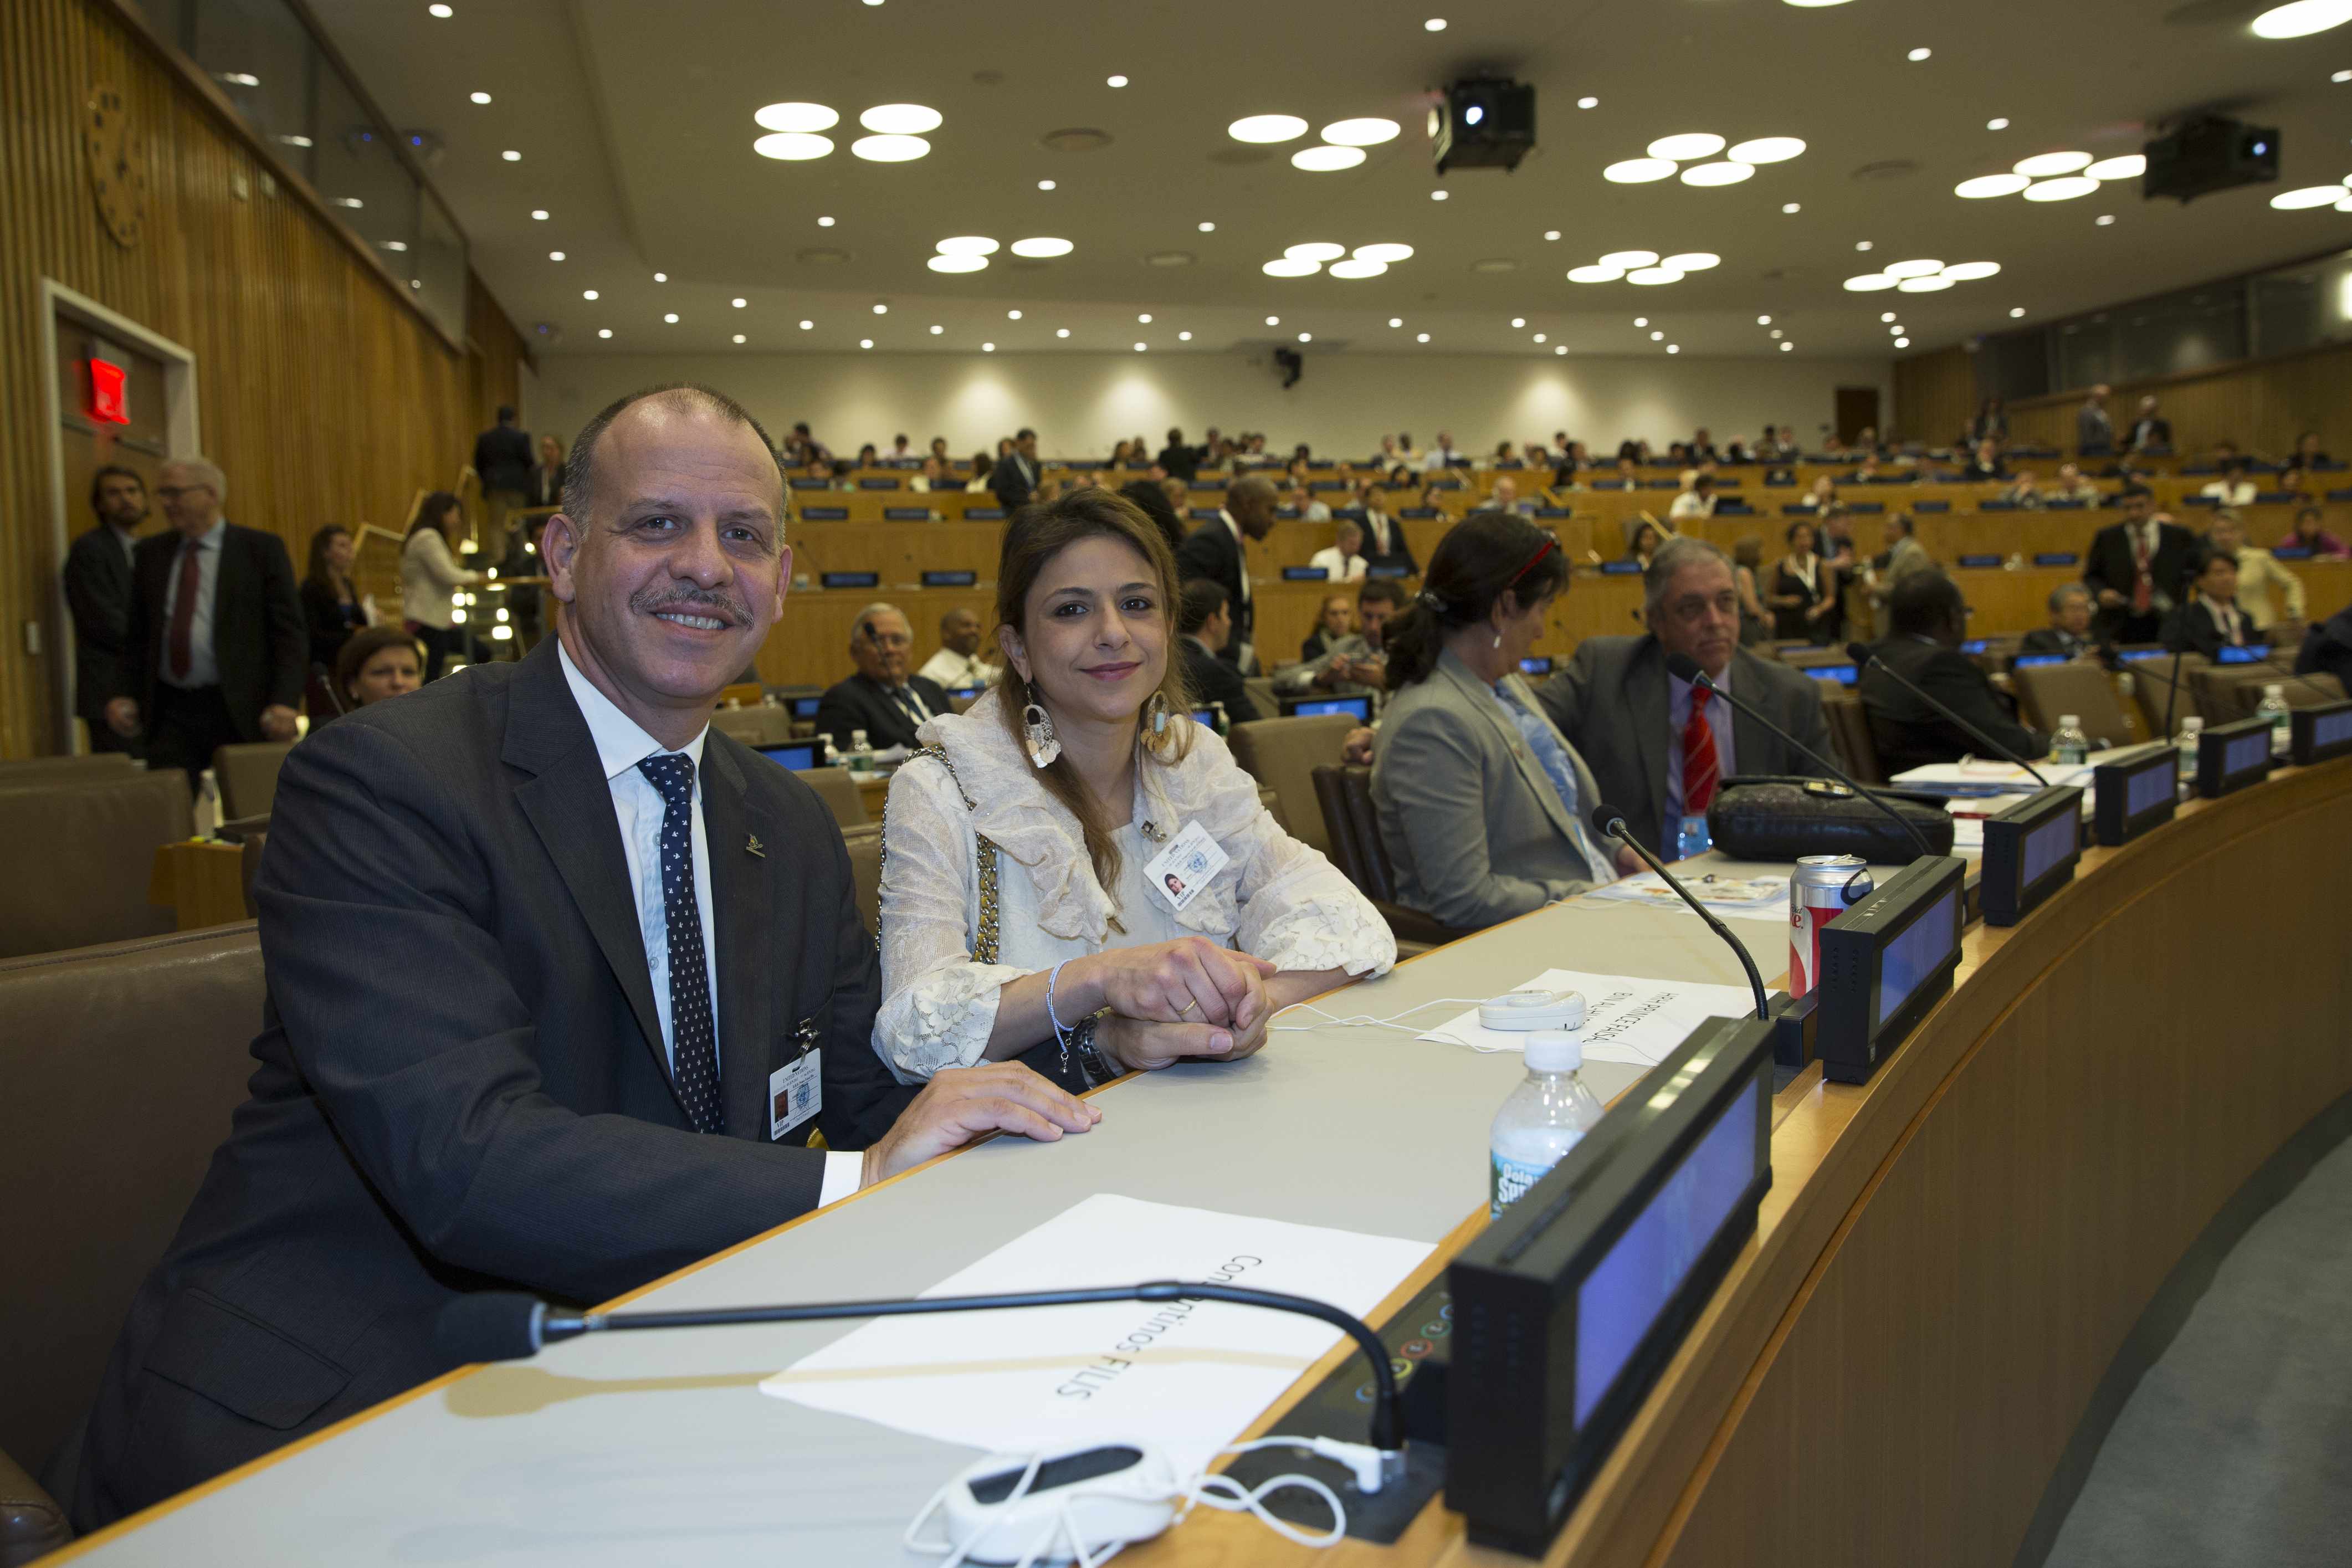 HRH Prince Feisal Al Hussein and HRH Princess Sarah Al-Feisal attend 3rd International Forum on Sport for Peace and Development at the UN Headqua 3